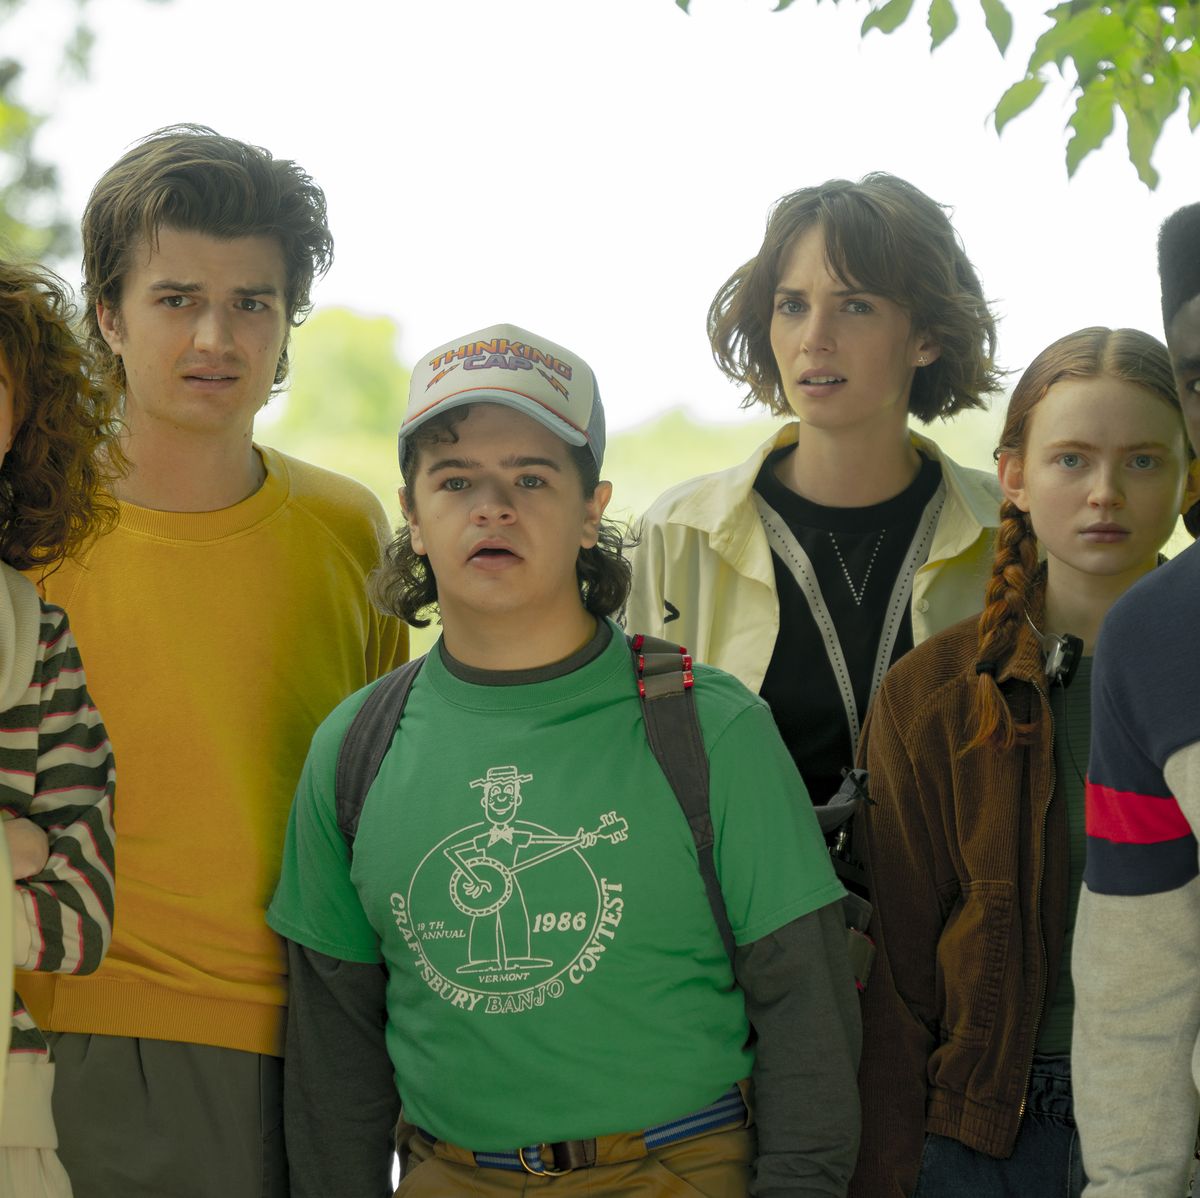 Stranger Things season 4 finale: Who is going to die? A Ranking